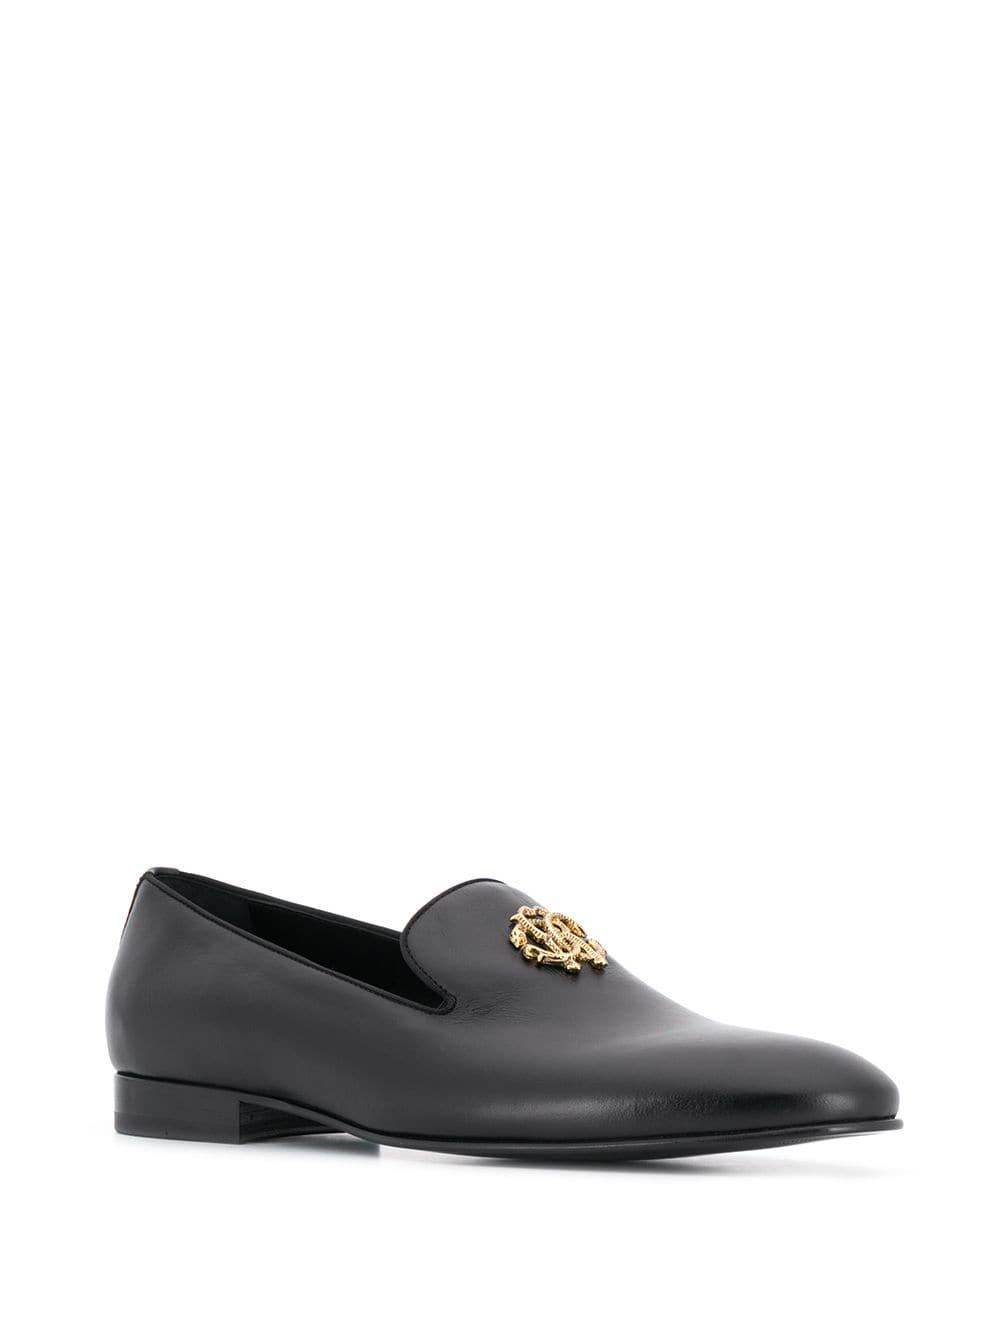 Roberto Cavalli Leather Gold-tone Logo Loafers in Black for Men - Lyst